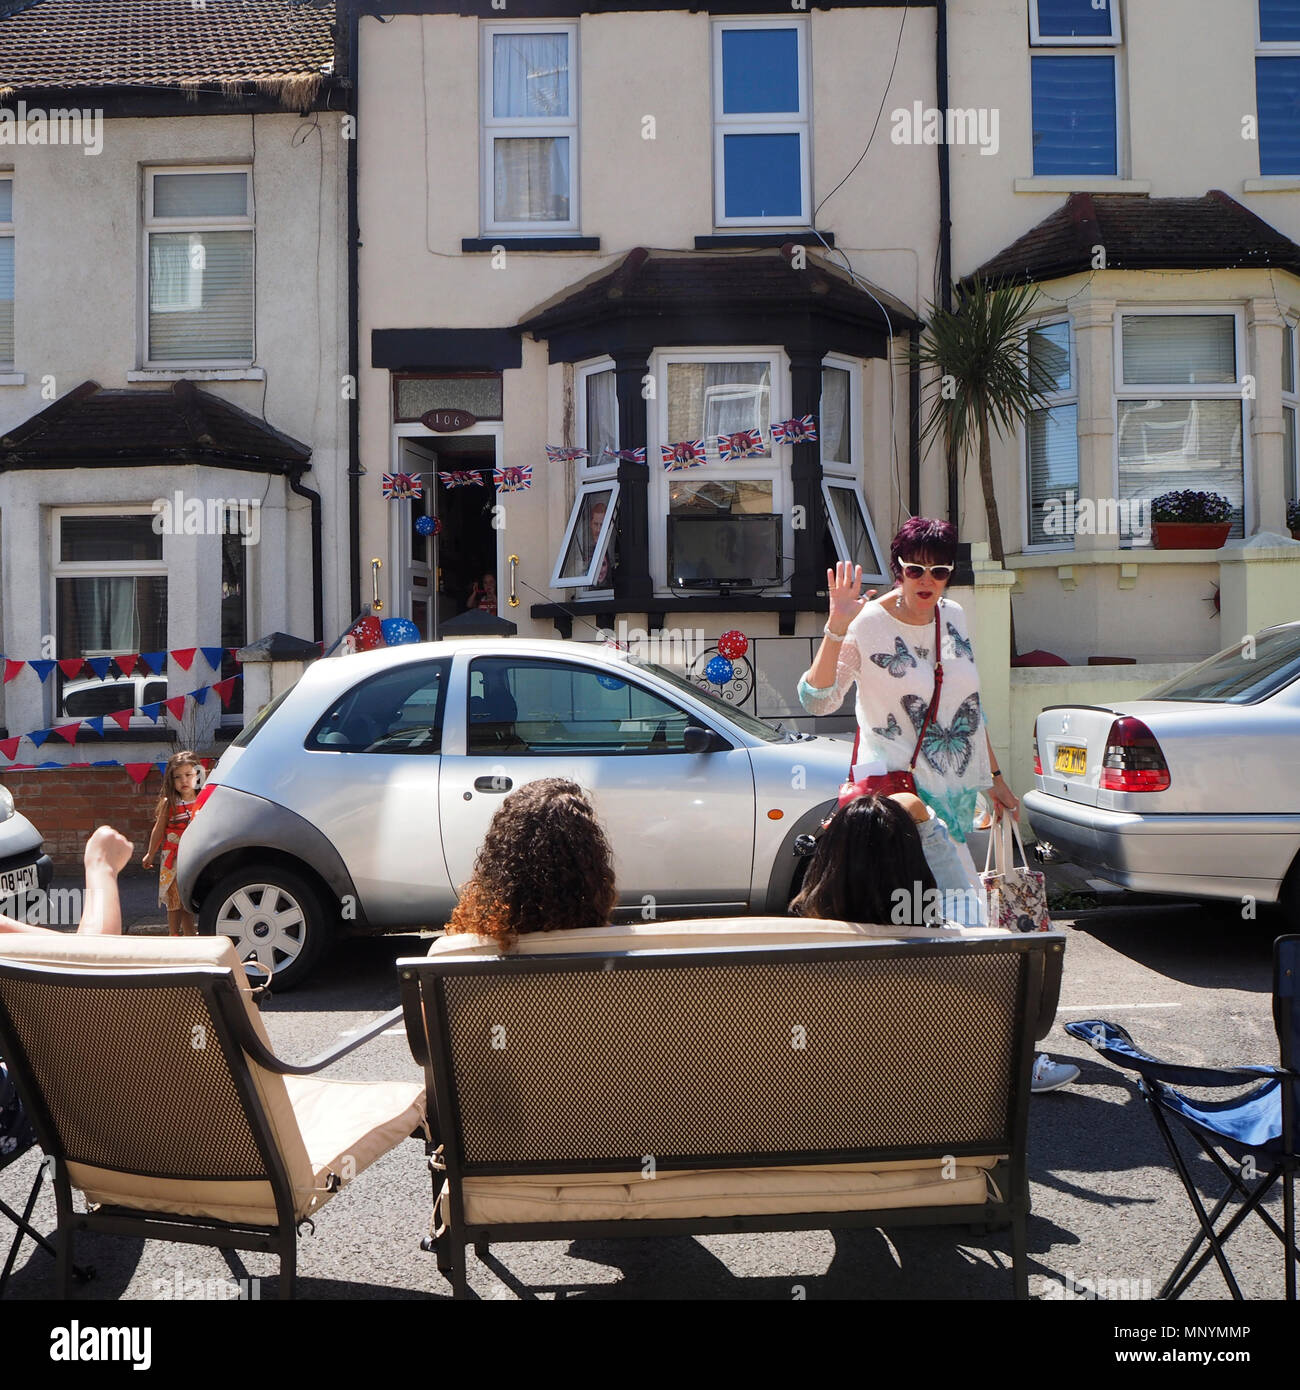 Residents sitting on sofa in street watching live coverage of the royal wedding celebrating Harry and Meghan's wedding Stock Photo